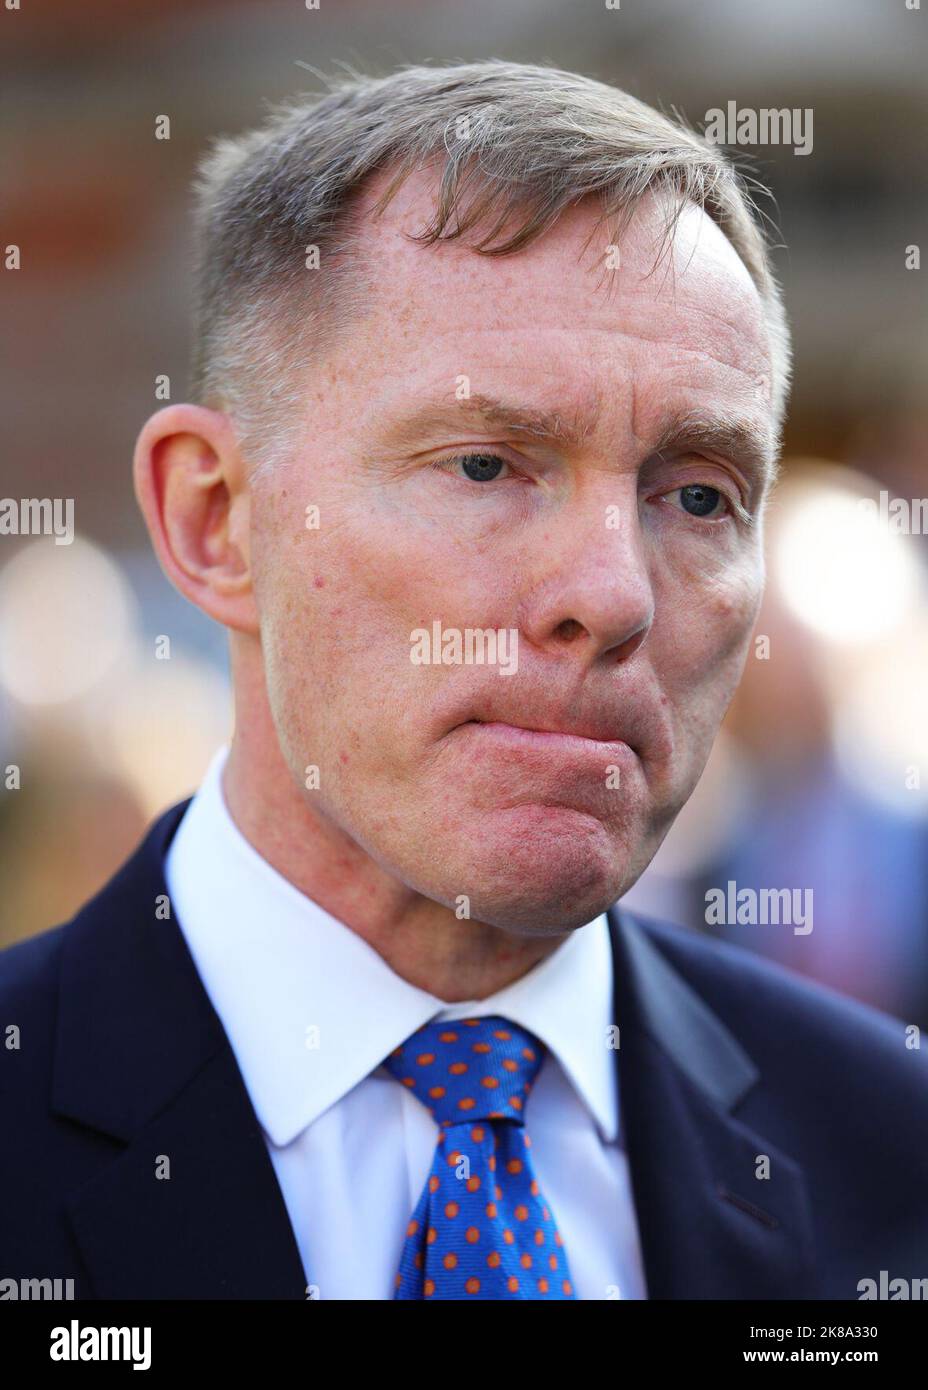 File photo dated 04/09/19 of Labour MP Chris Bryant outside the Houses of Parliament in Westminster, London. Mr Bryant, a Labour MP for Rhondda and chairman of the Commons Committee on Standards, said that he believes the public want a general election to "press the reset button." Mr Bryant was part of the cross-party Privileges Committee which is currently investigating whether Boris Johnson deliberately misled Parliament about the parties held in Number 10. However, he withdrew himself from the committee's inquiry as he had already publicly condemned Mr Johnson's behaviour. Issue date: Satur Stock Photo